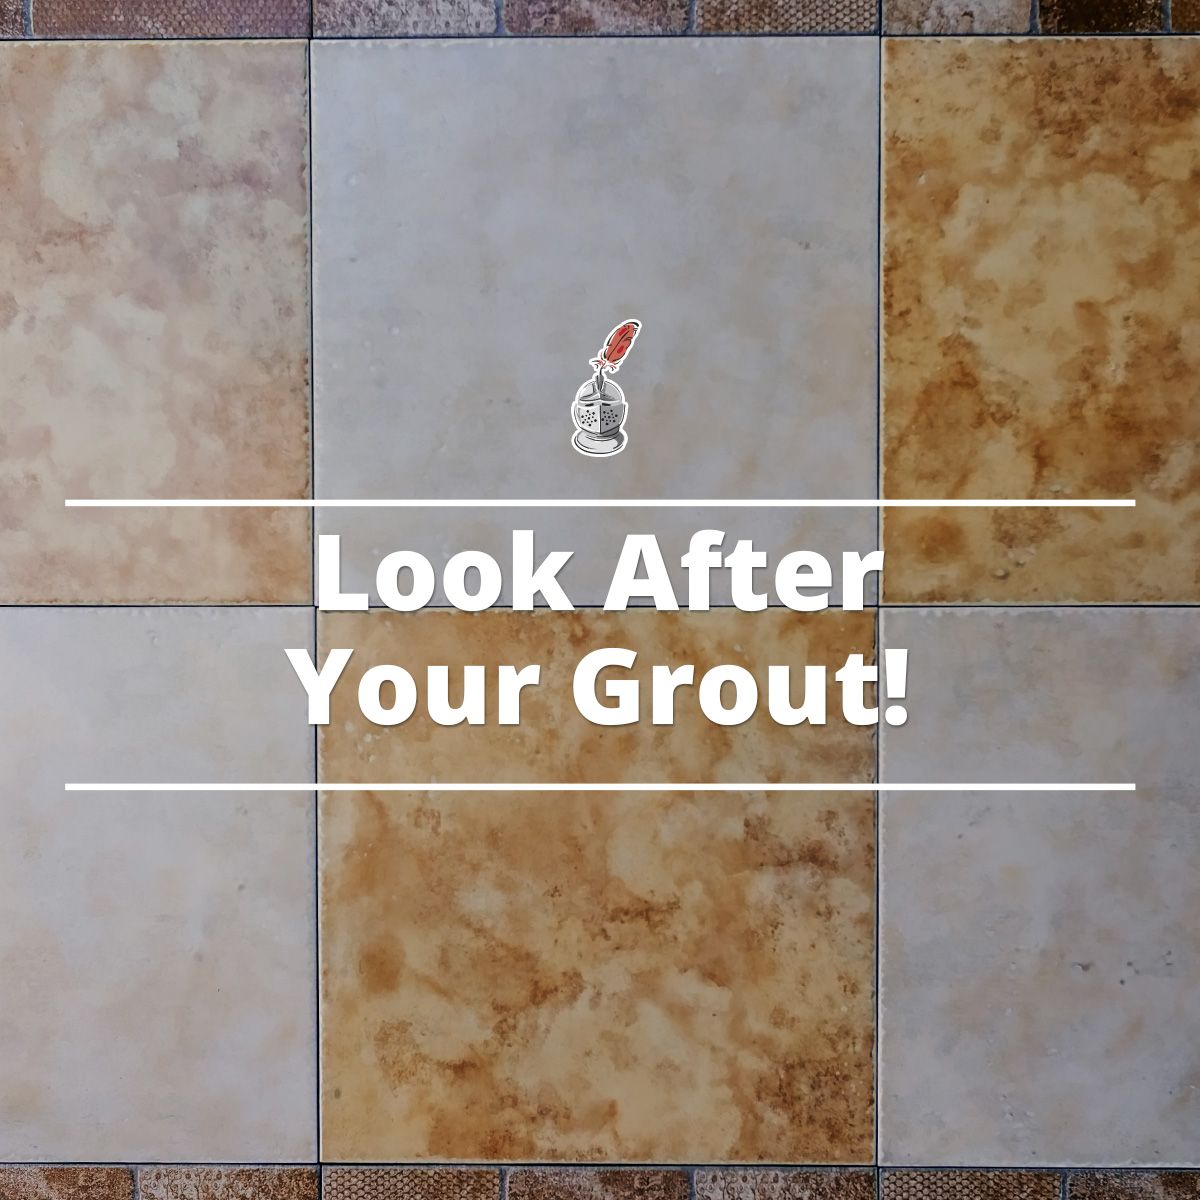 Look After Your Grout!